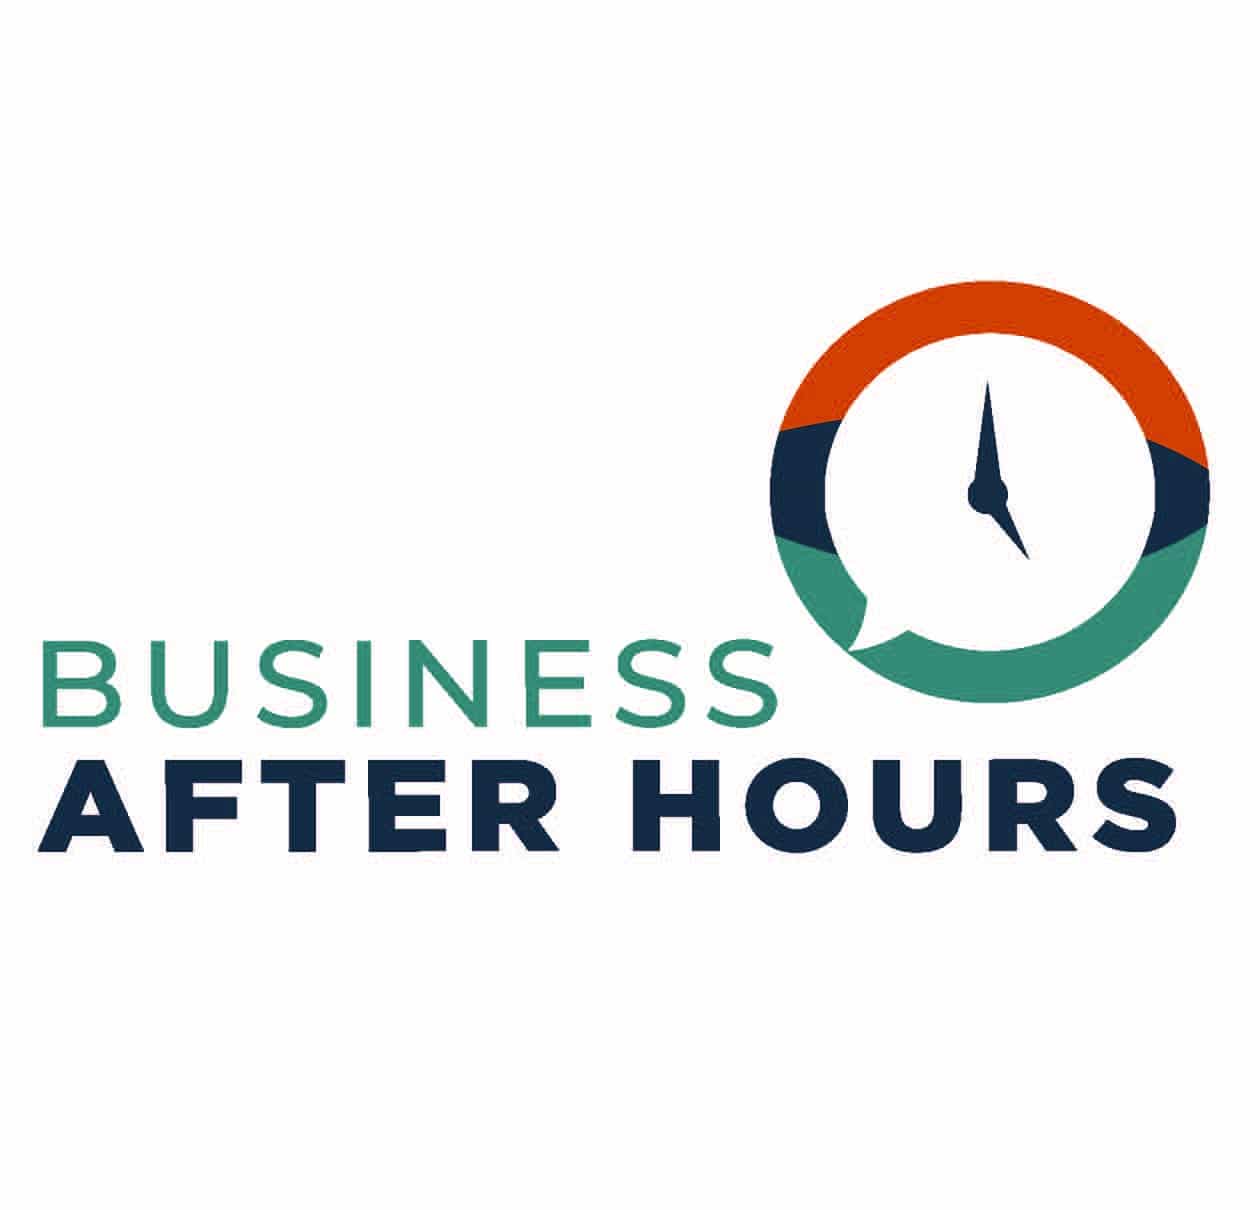 Business After Hours Logo